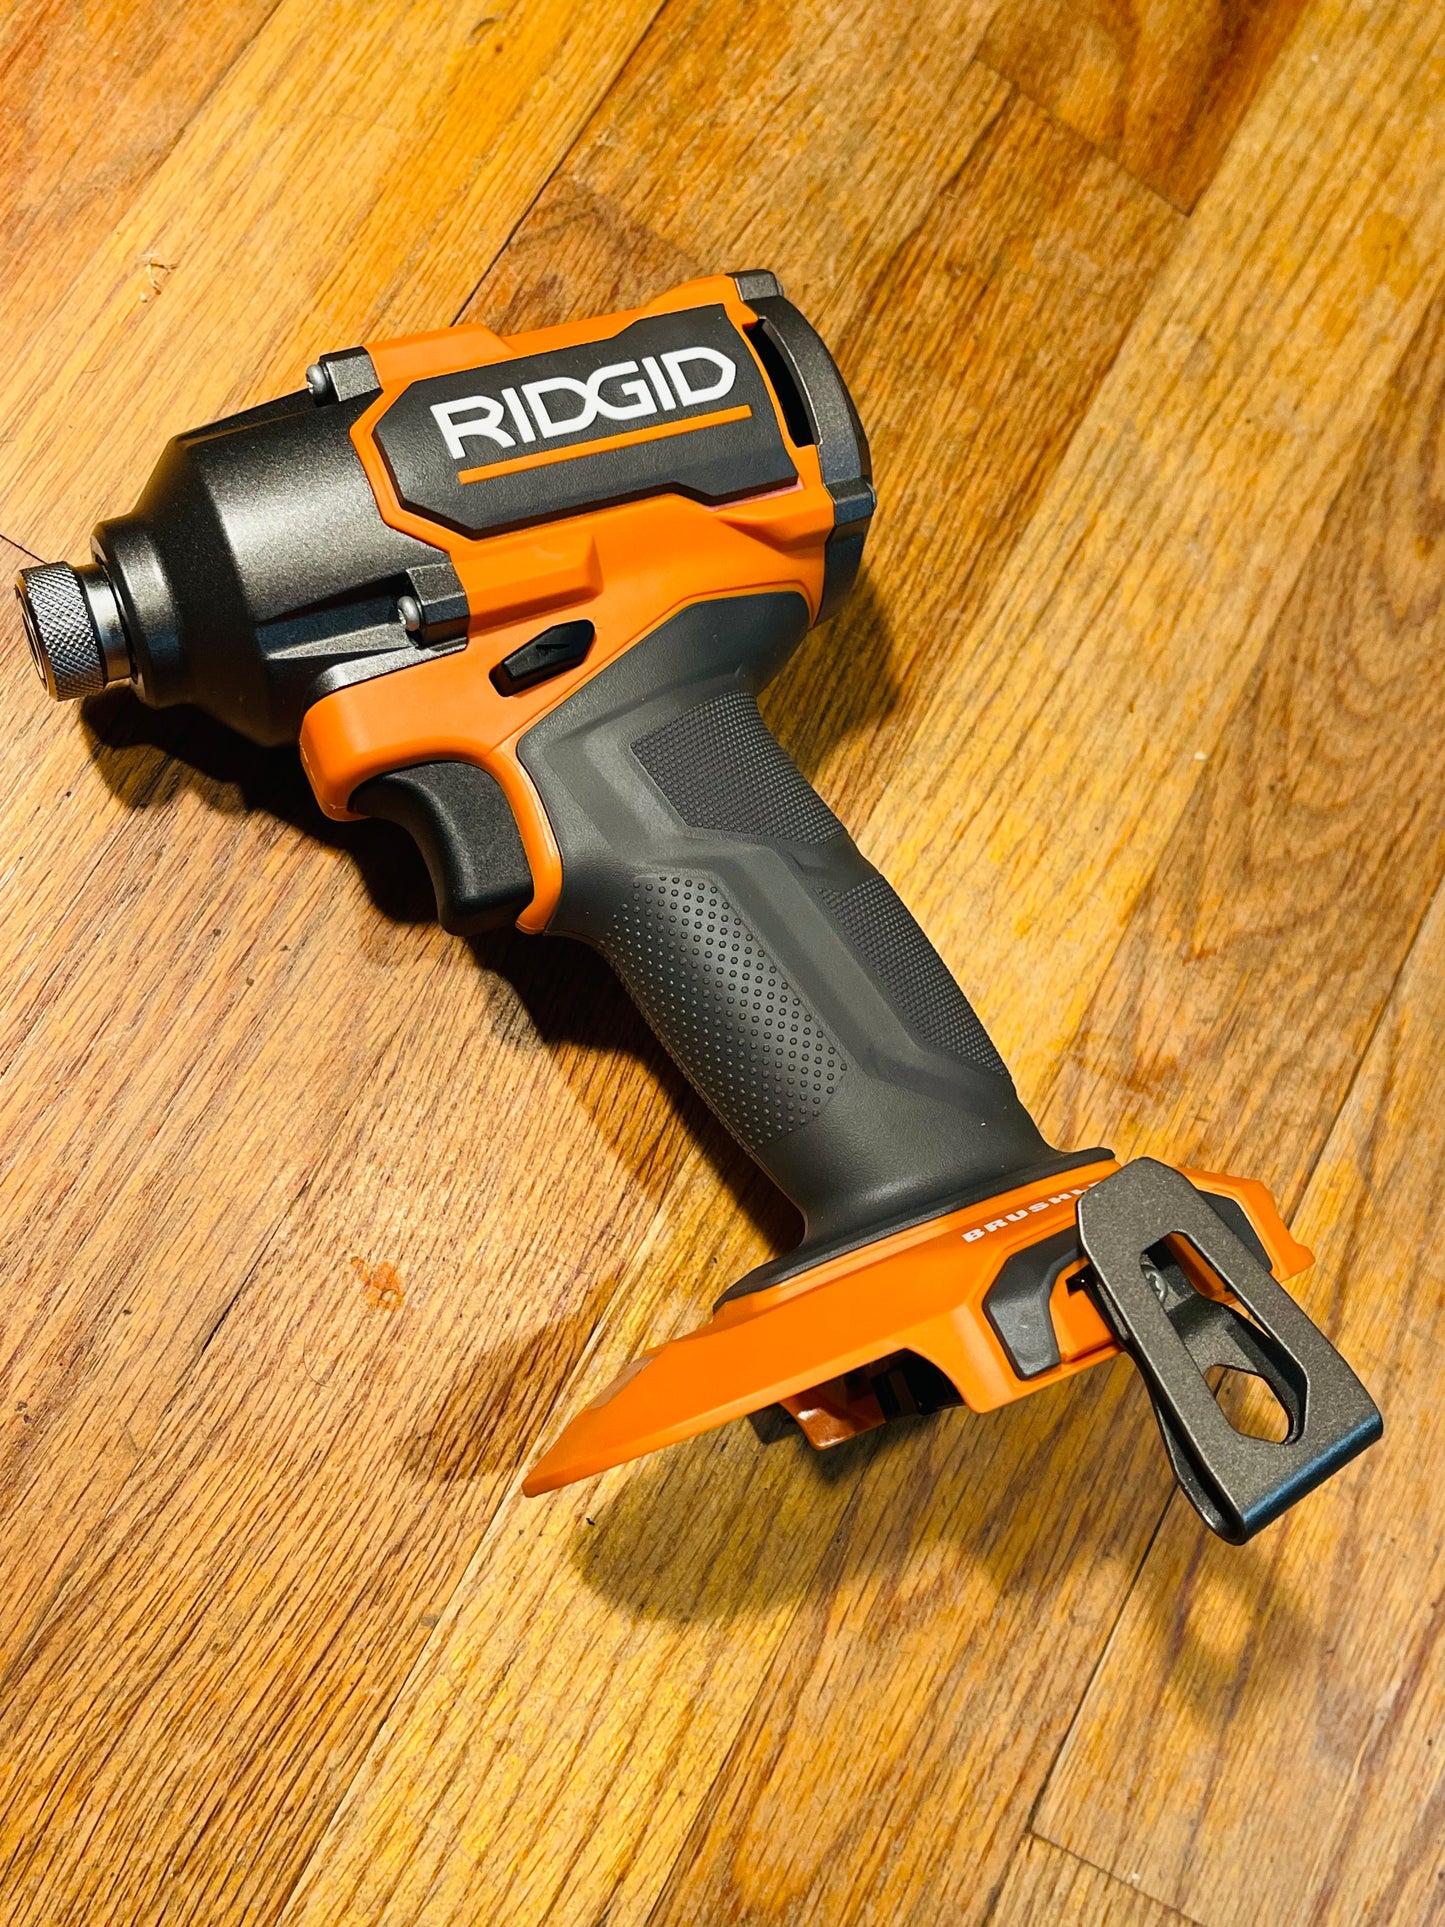 RIDGID
18V Brushless Cordless 3-Speed 1/4 in. Impact Driver (Tool Only)